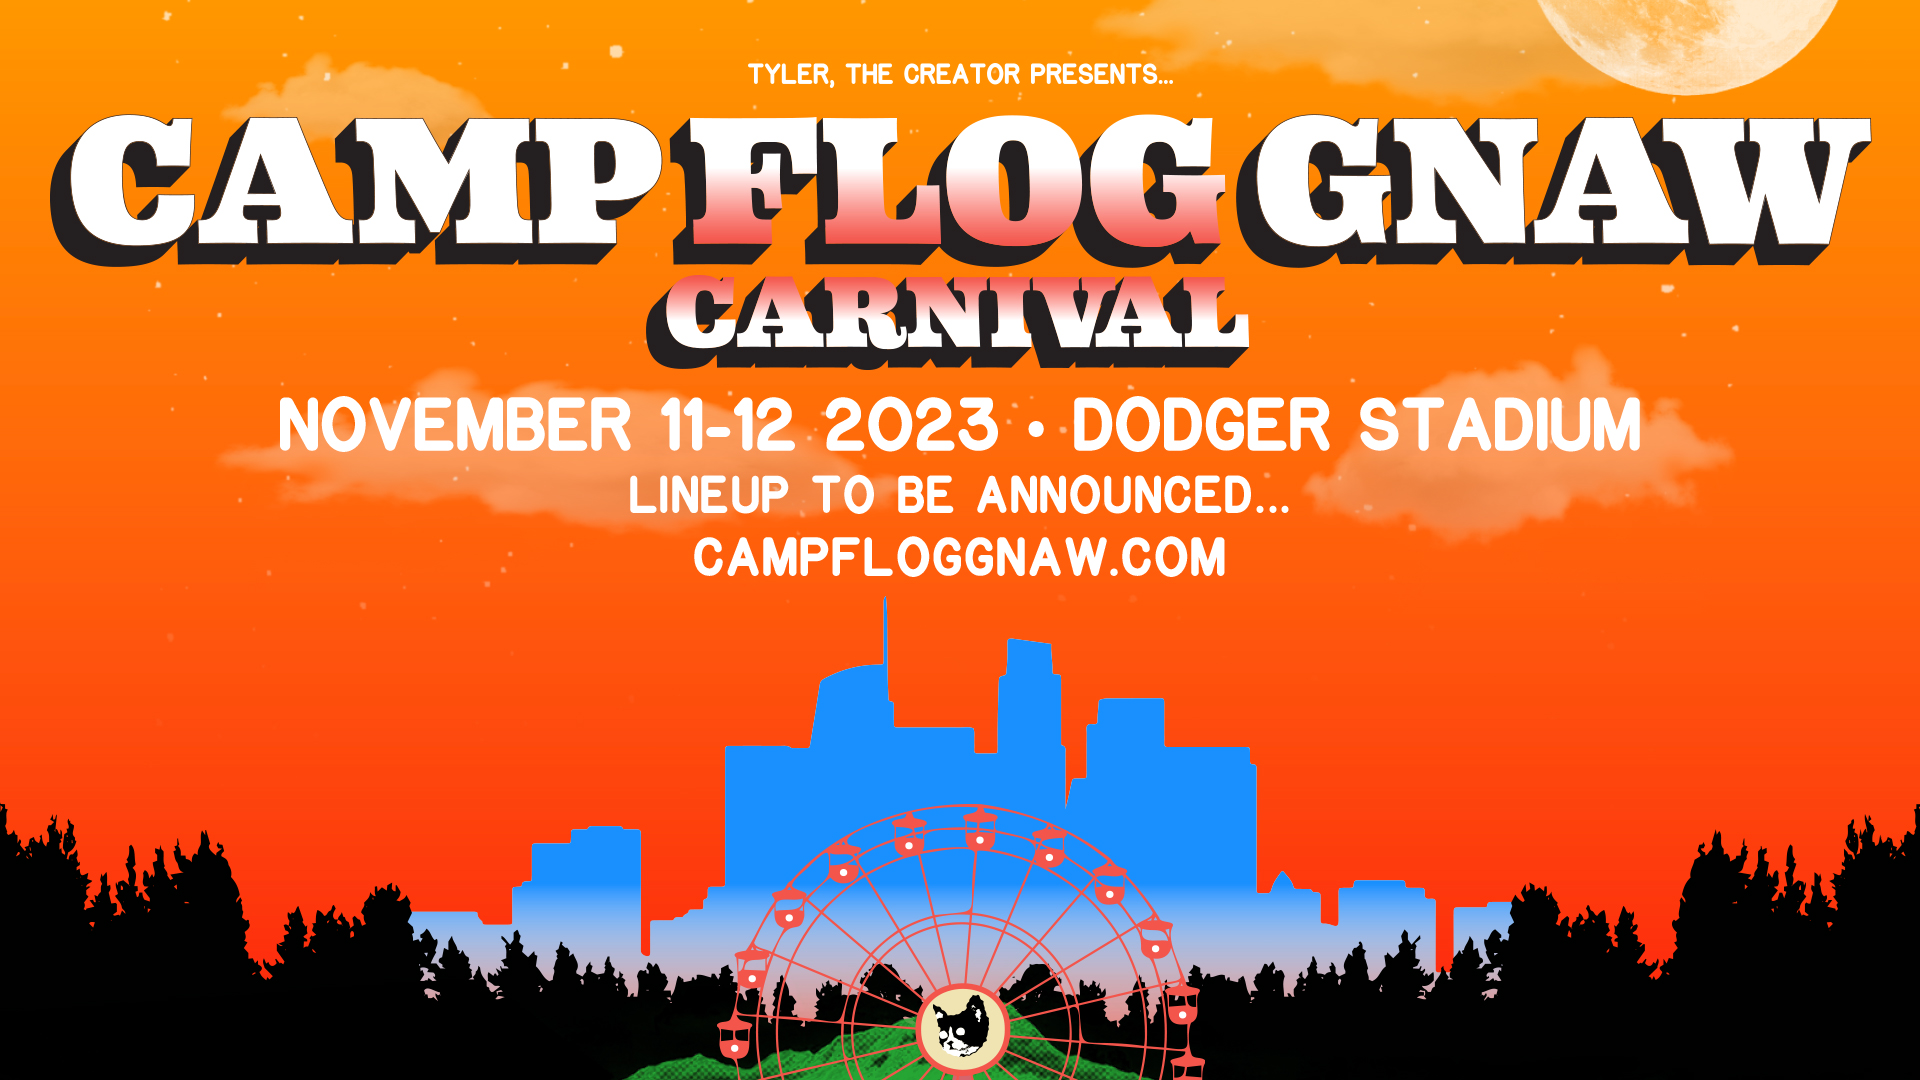 Camp Flog Gnaw will return to Dodger Stadium for the first time